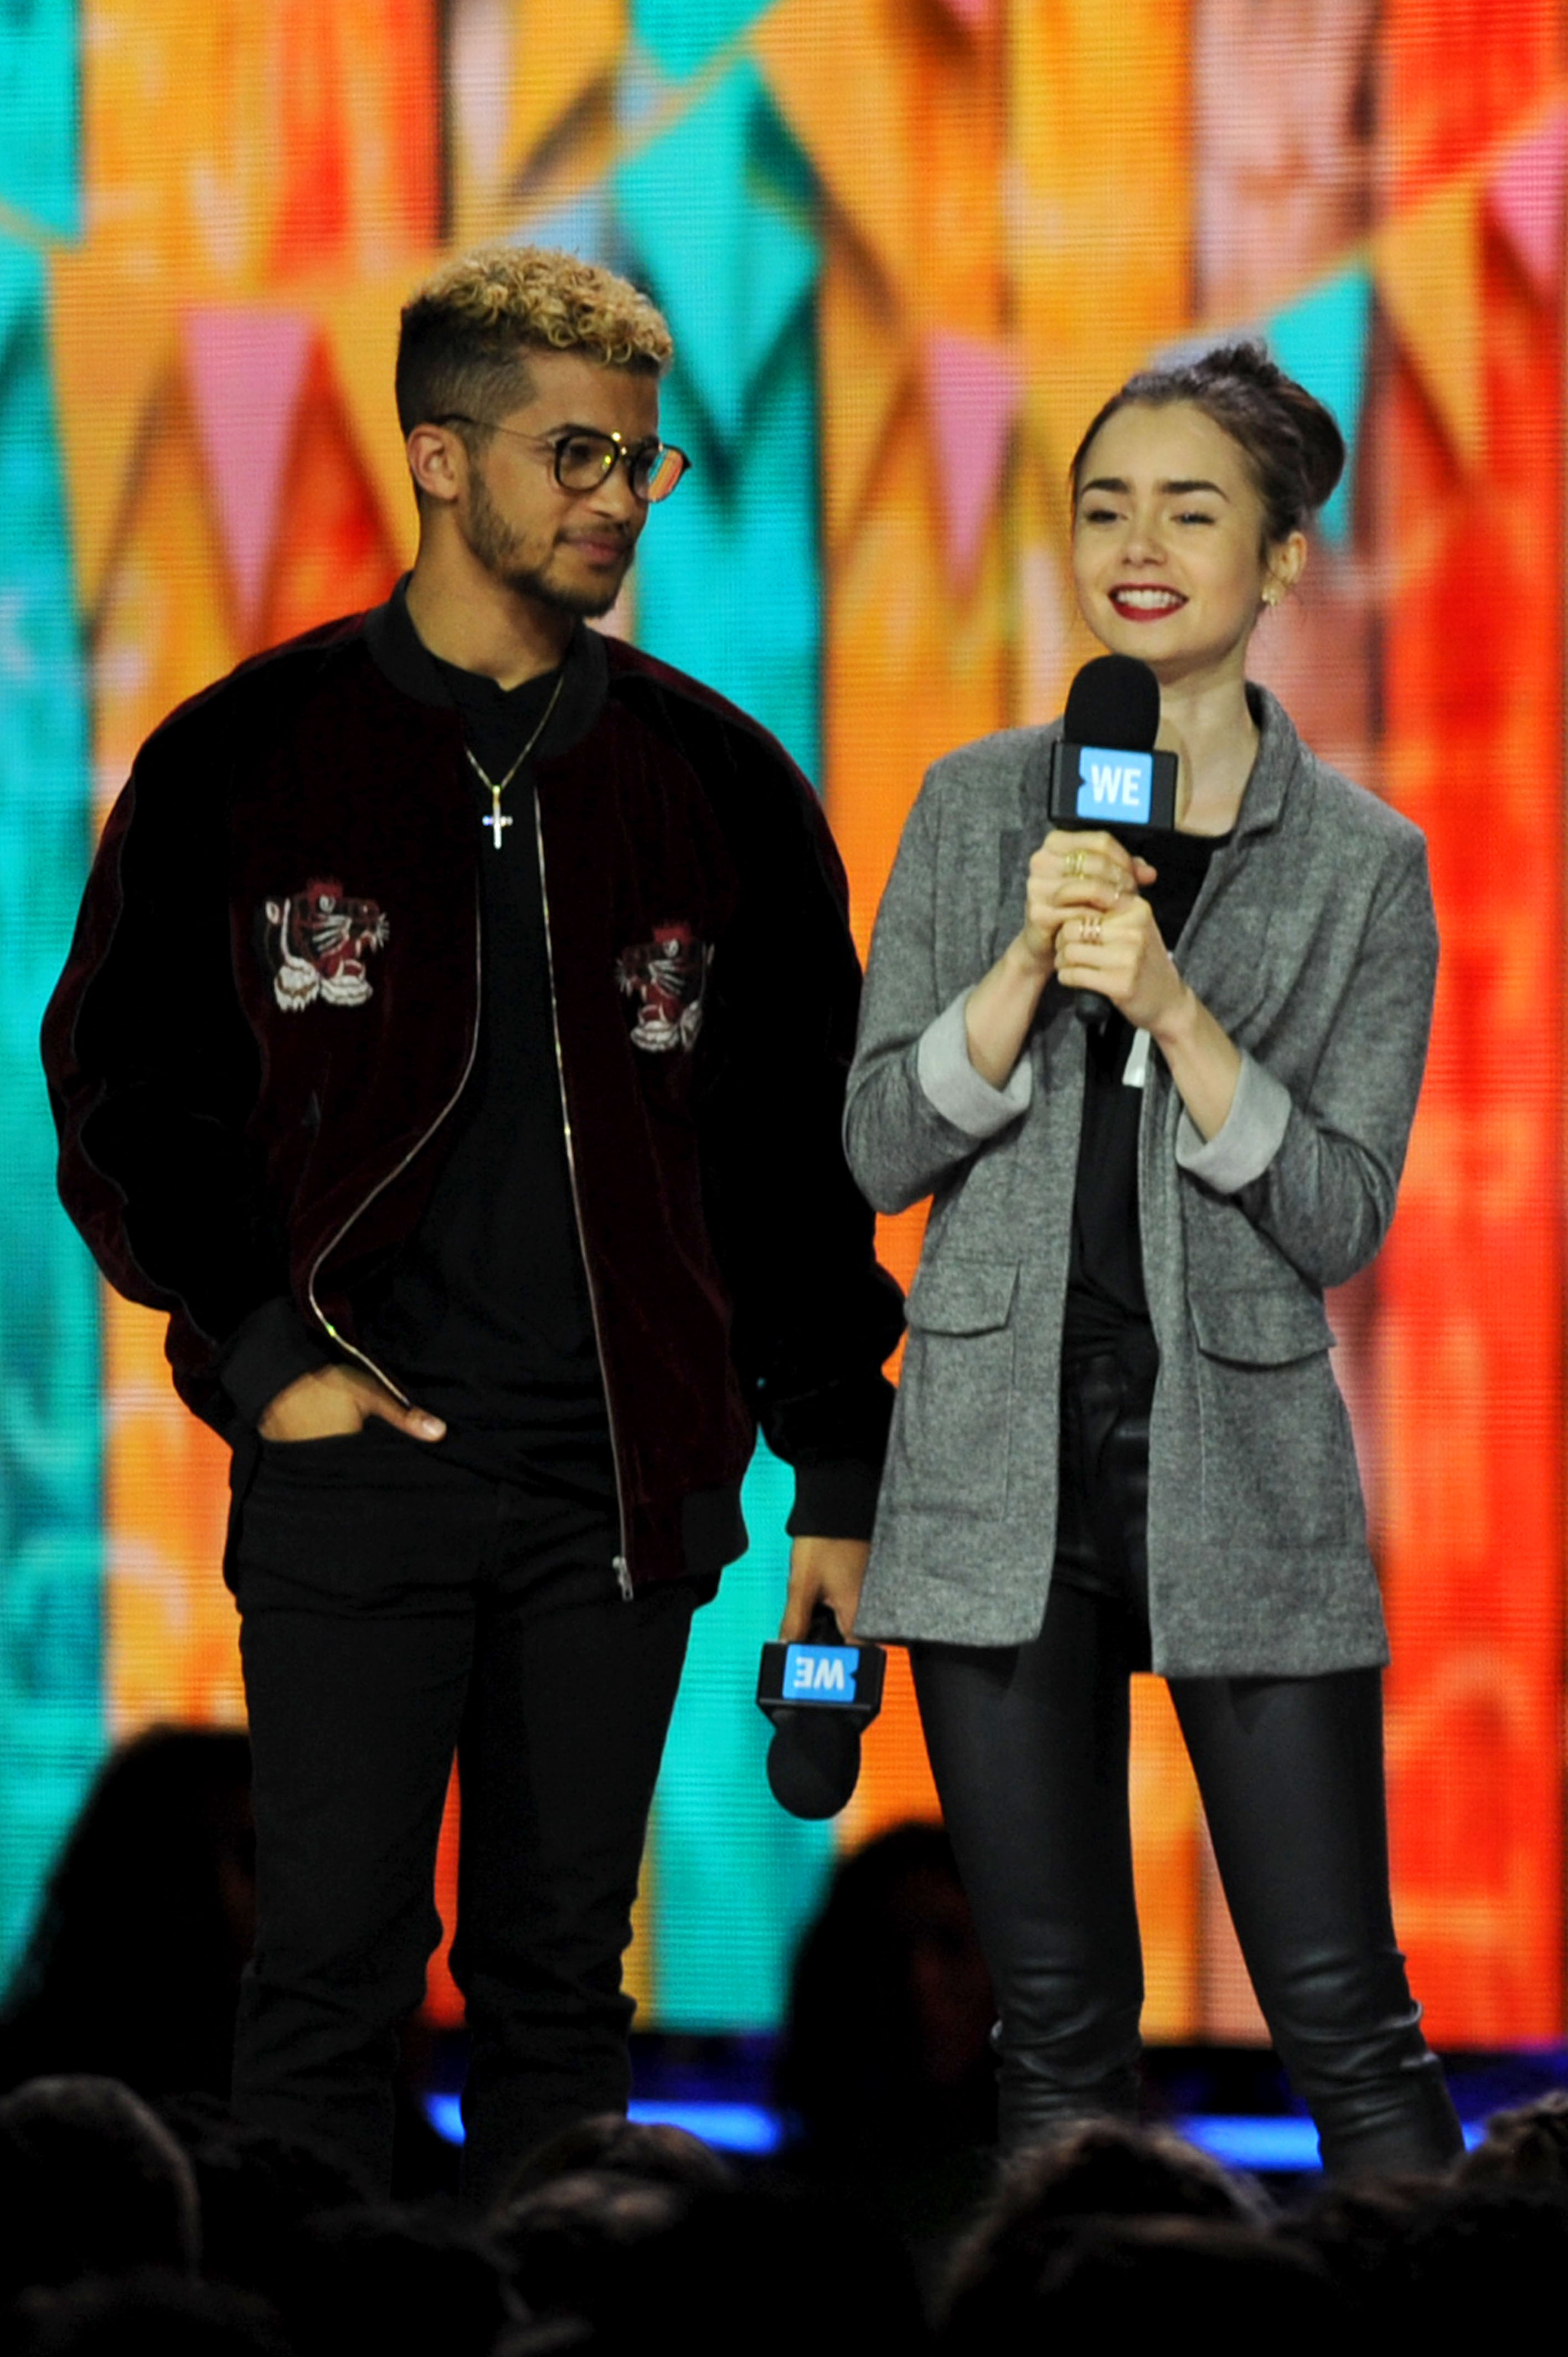 Lily Collins attends WE Day